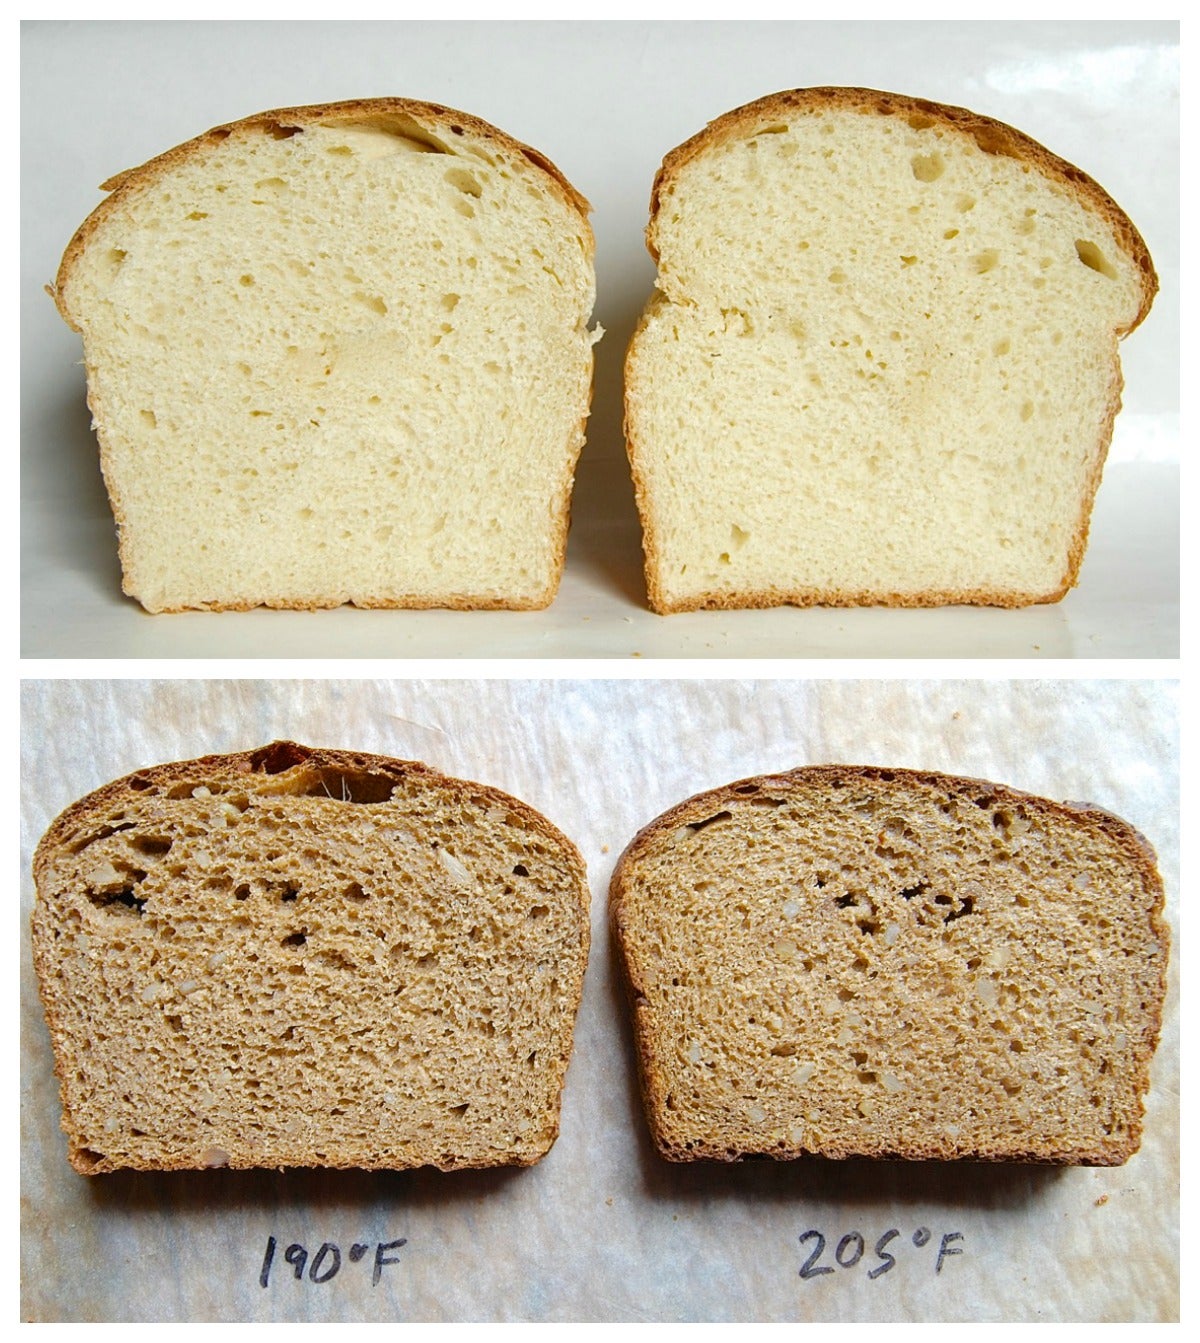 How To Tell When Sourdough Bread Is Done (cooked through) - The